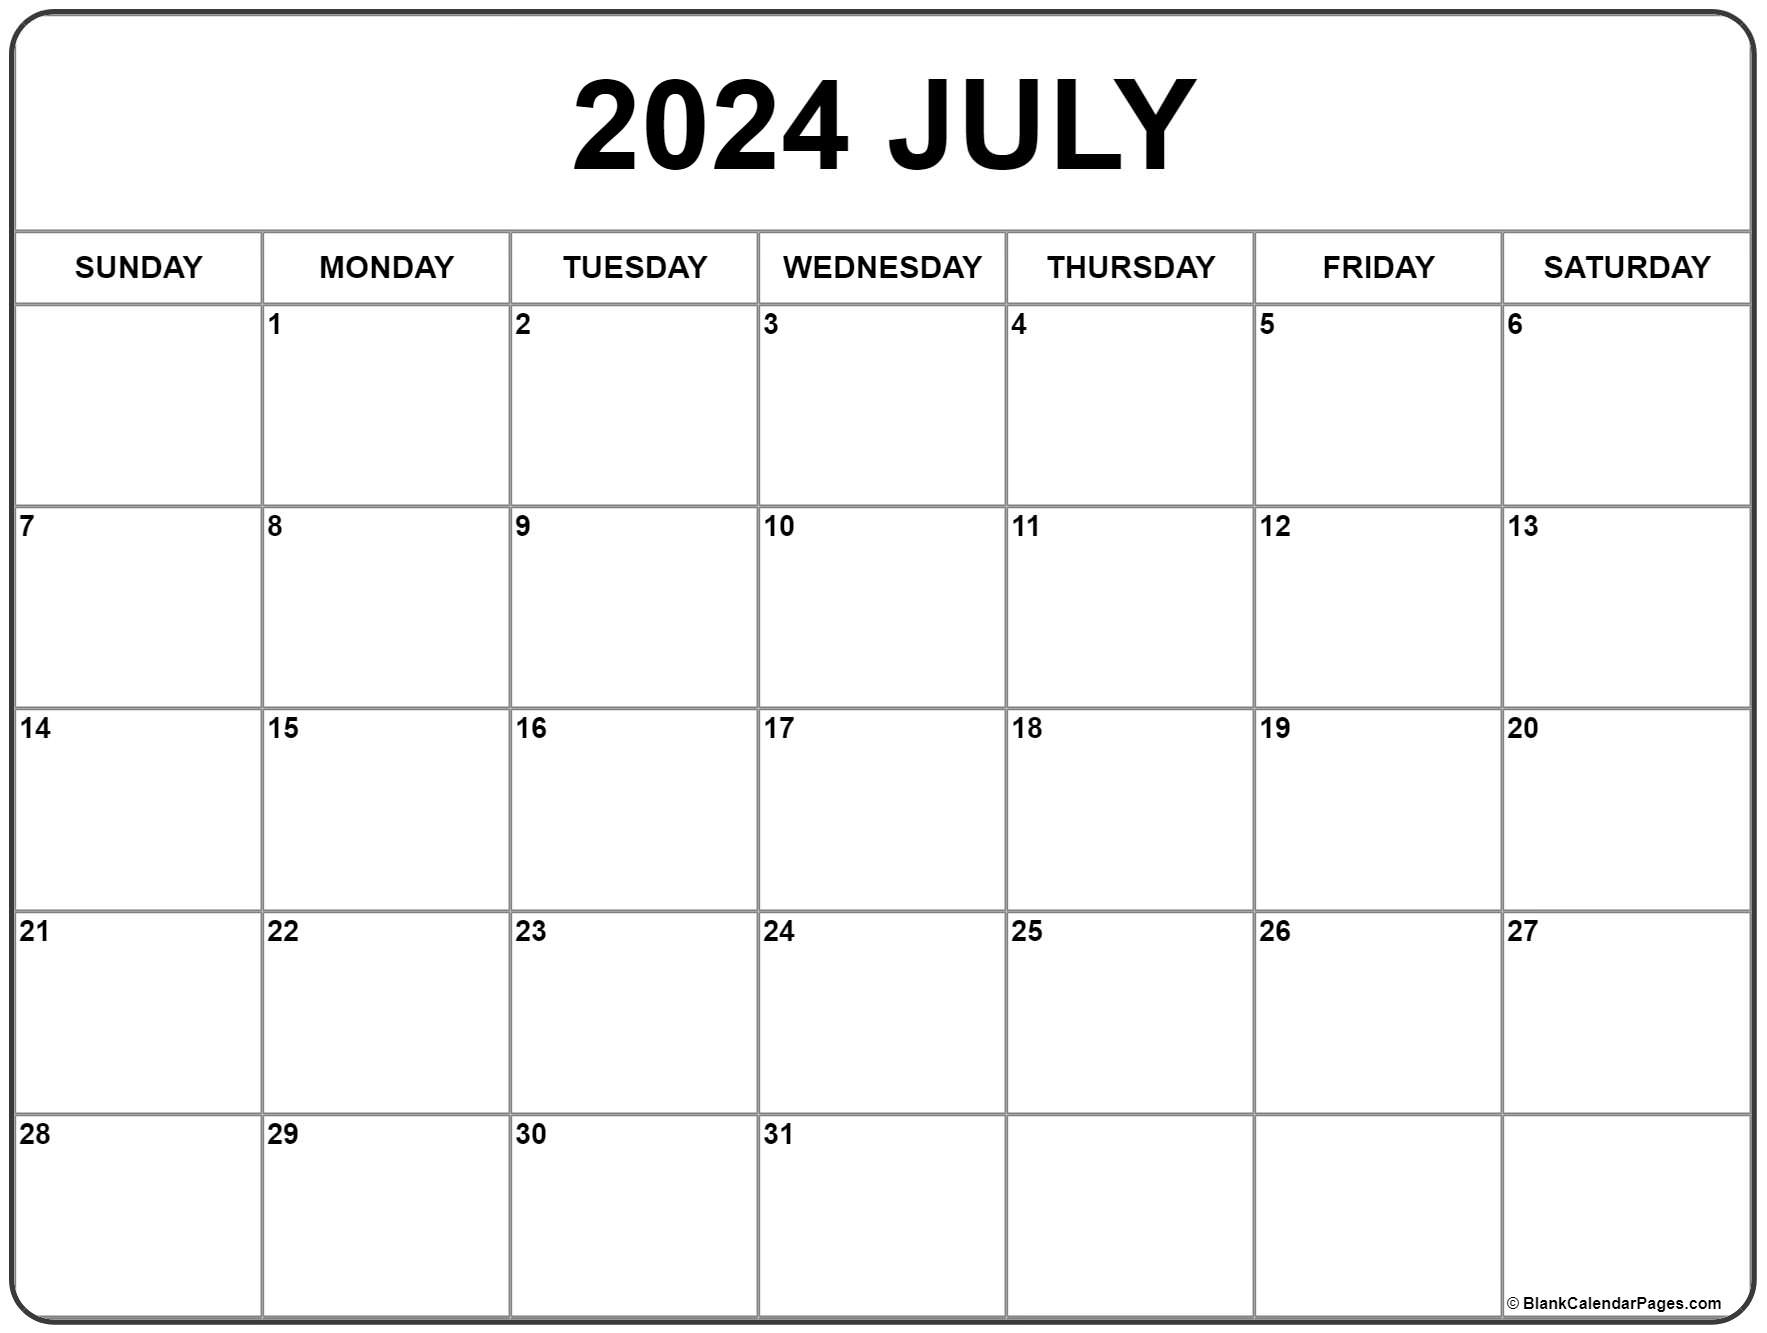 July 2024 Calendar | Free Printable Calendar with Calendar Pages July 2024